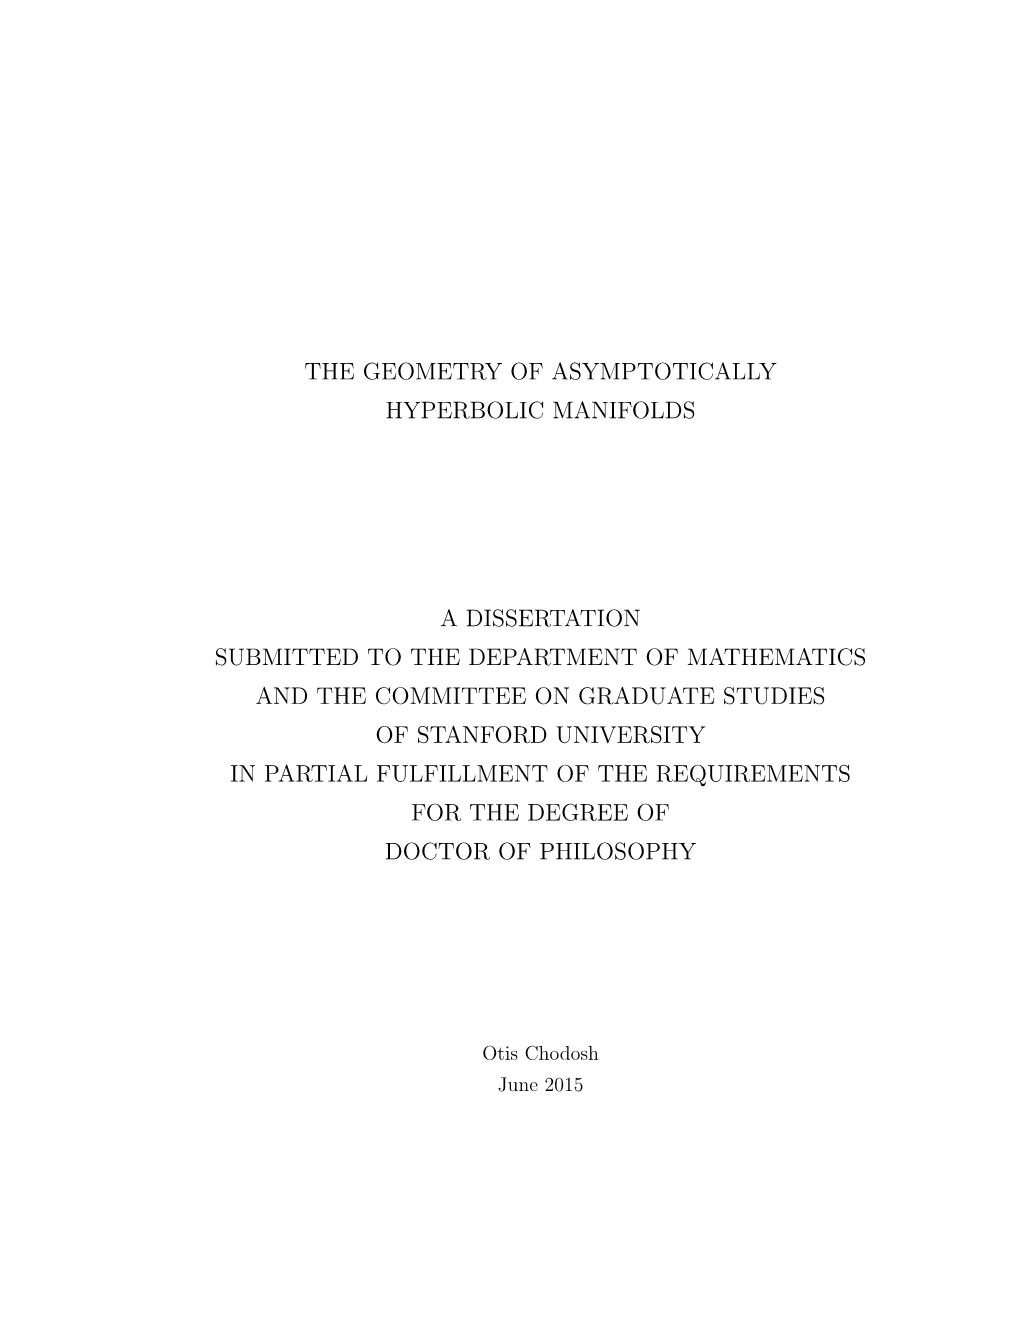 The Geometry of Asymptotically Hyperbolic Manifolds a Dissertation Submitted to the Department of Mathematics and the Committee